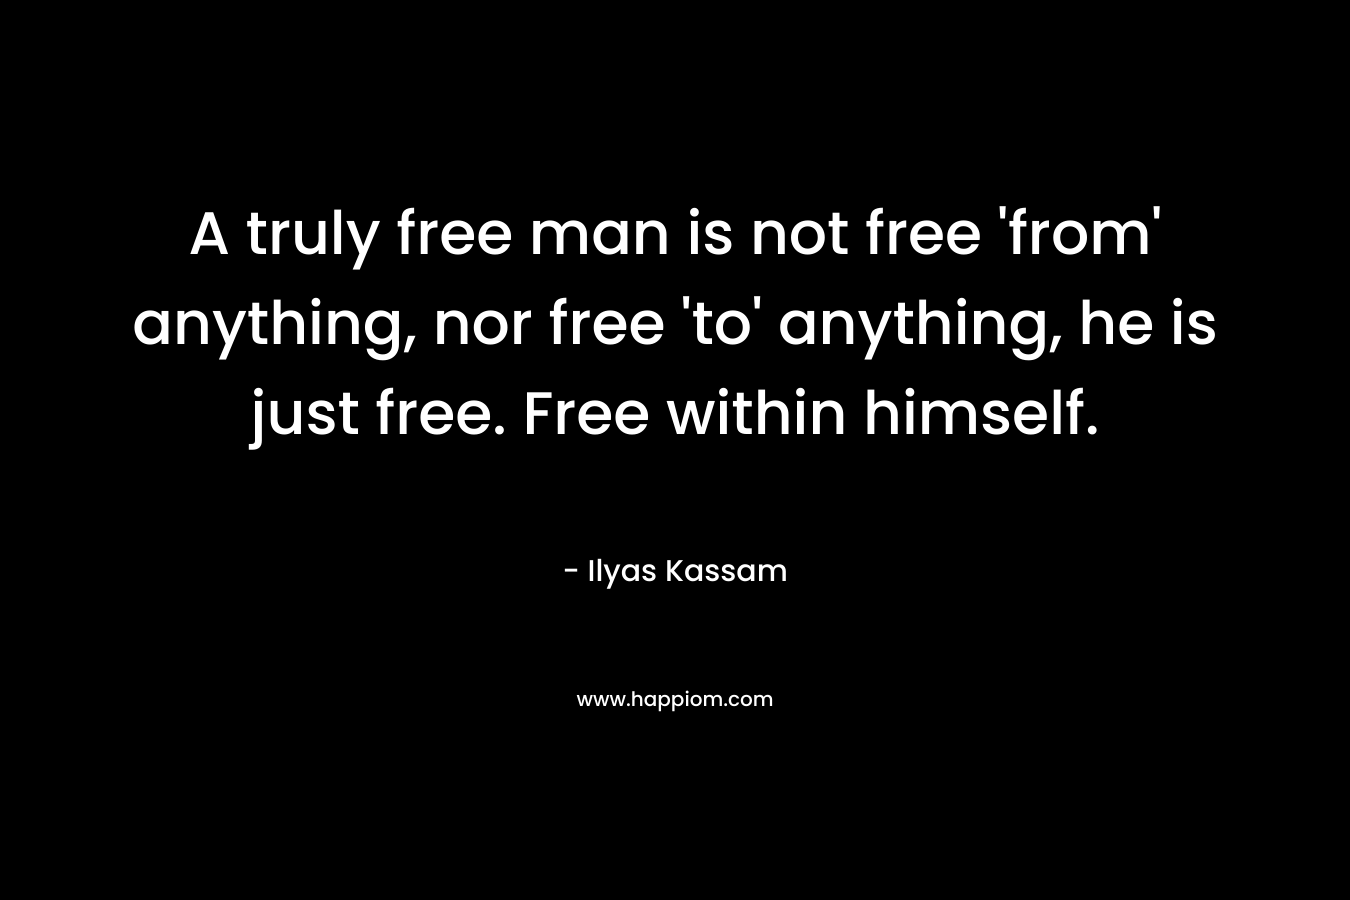 A truly free man is not free 'from' anything, nor free 'to' anything, he is just free. Free within himself.